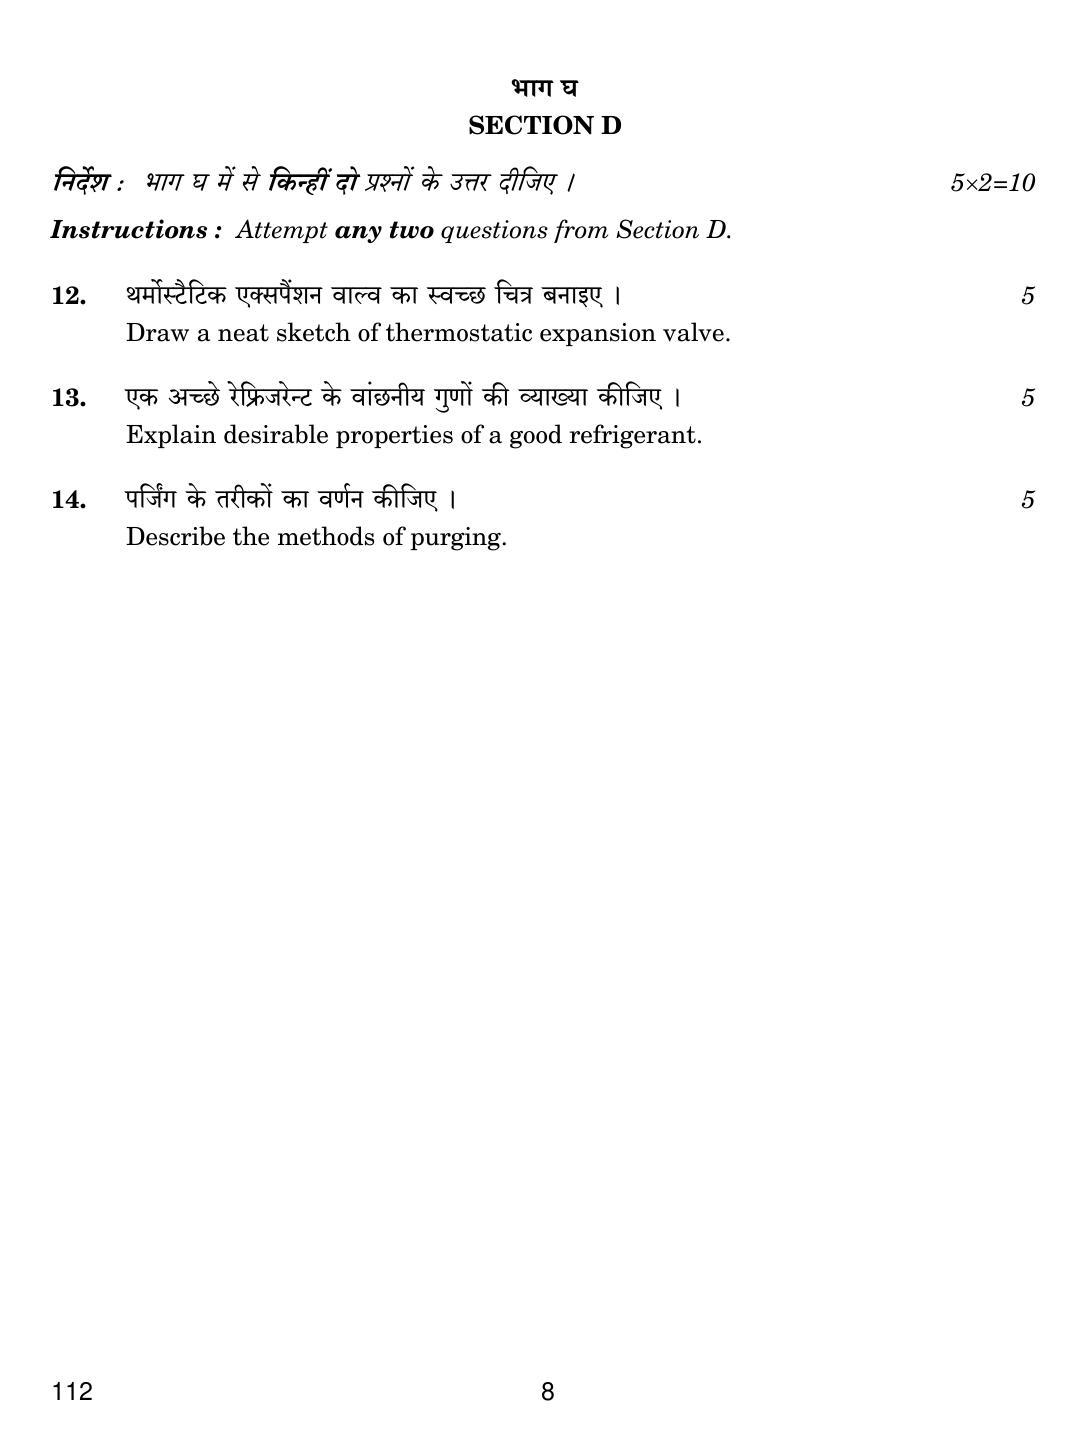 CBSE Class 12 112 Air-Conditioning And Refrigeration-III 2019 Question Paper - Page 8